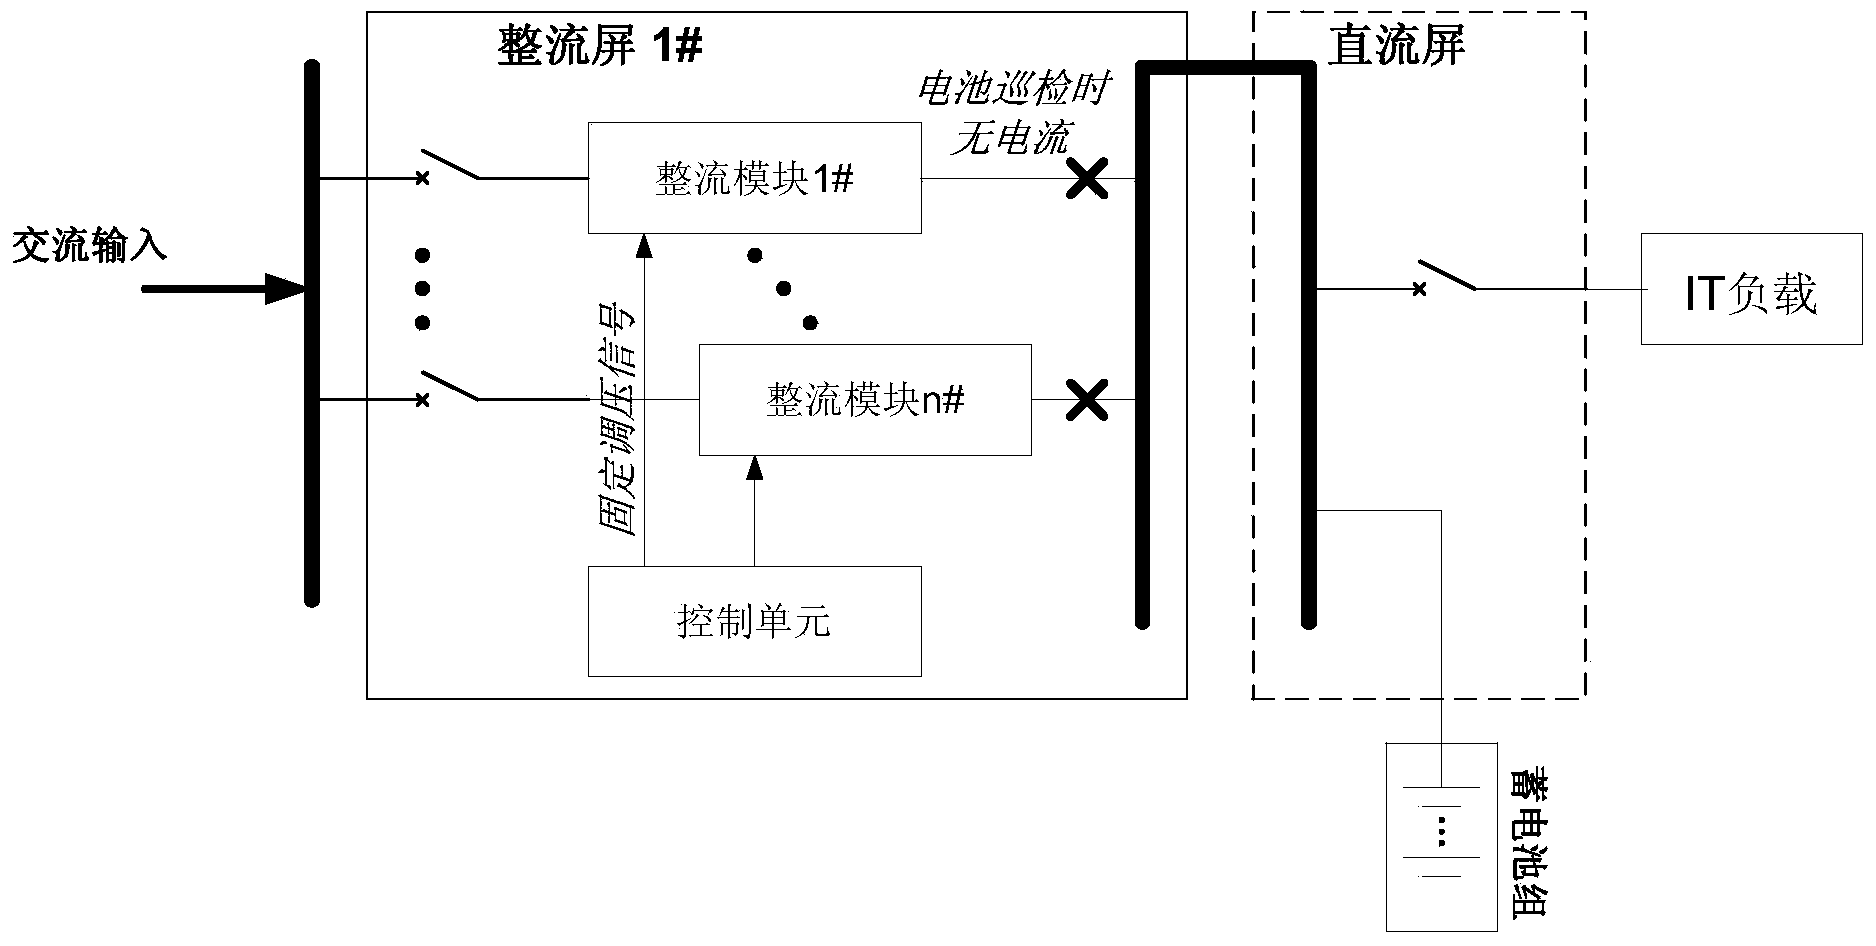 High-voltage direct-current power supply system